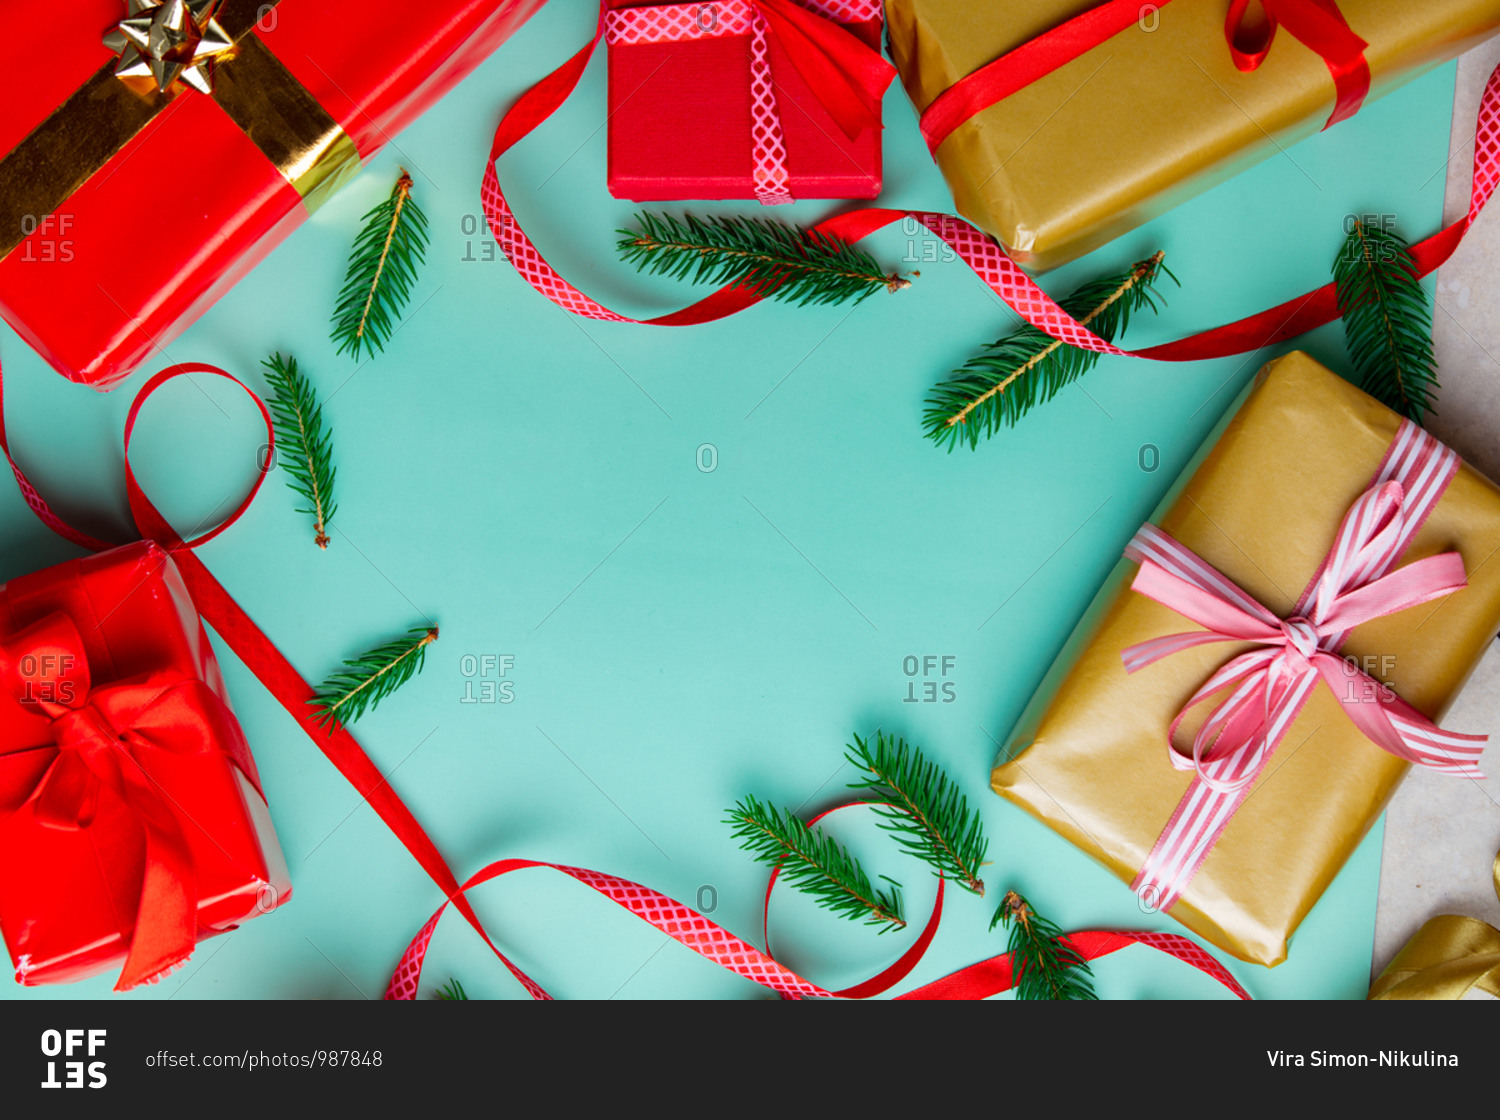 Christmas gifts with ribbons and pine tree branches on blue background